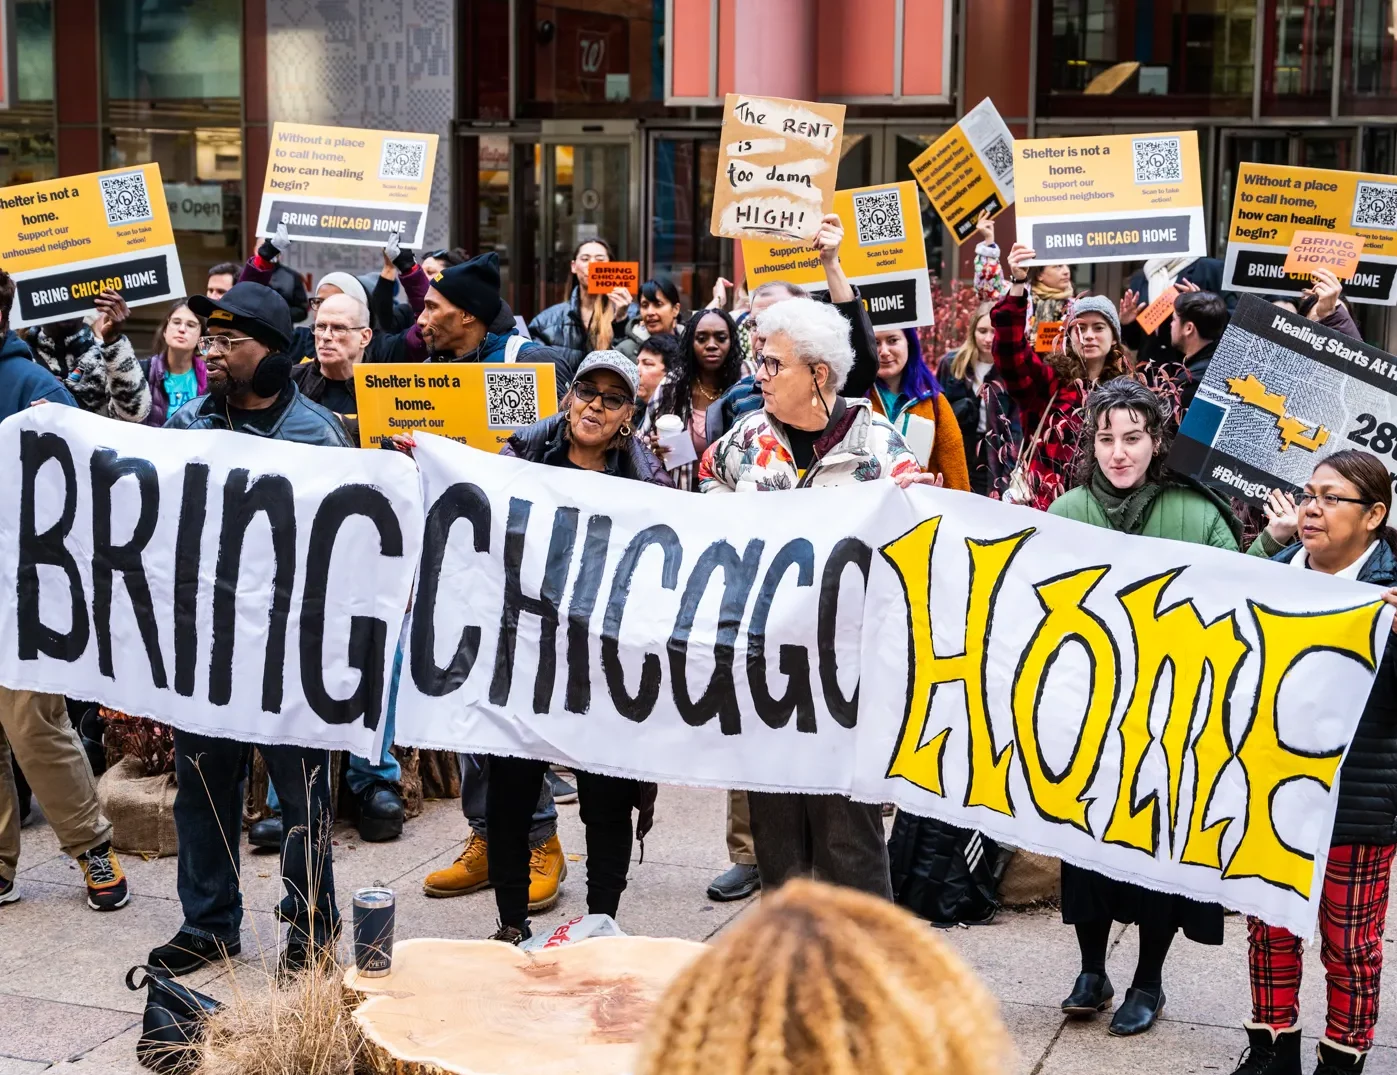 March 19th: Vote to Bring Chicago Home